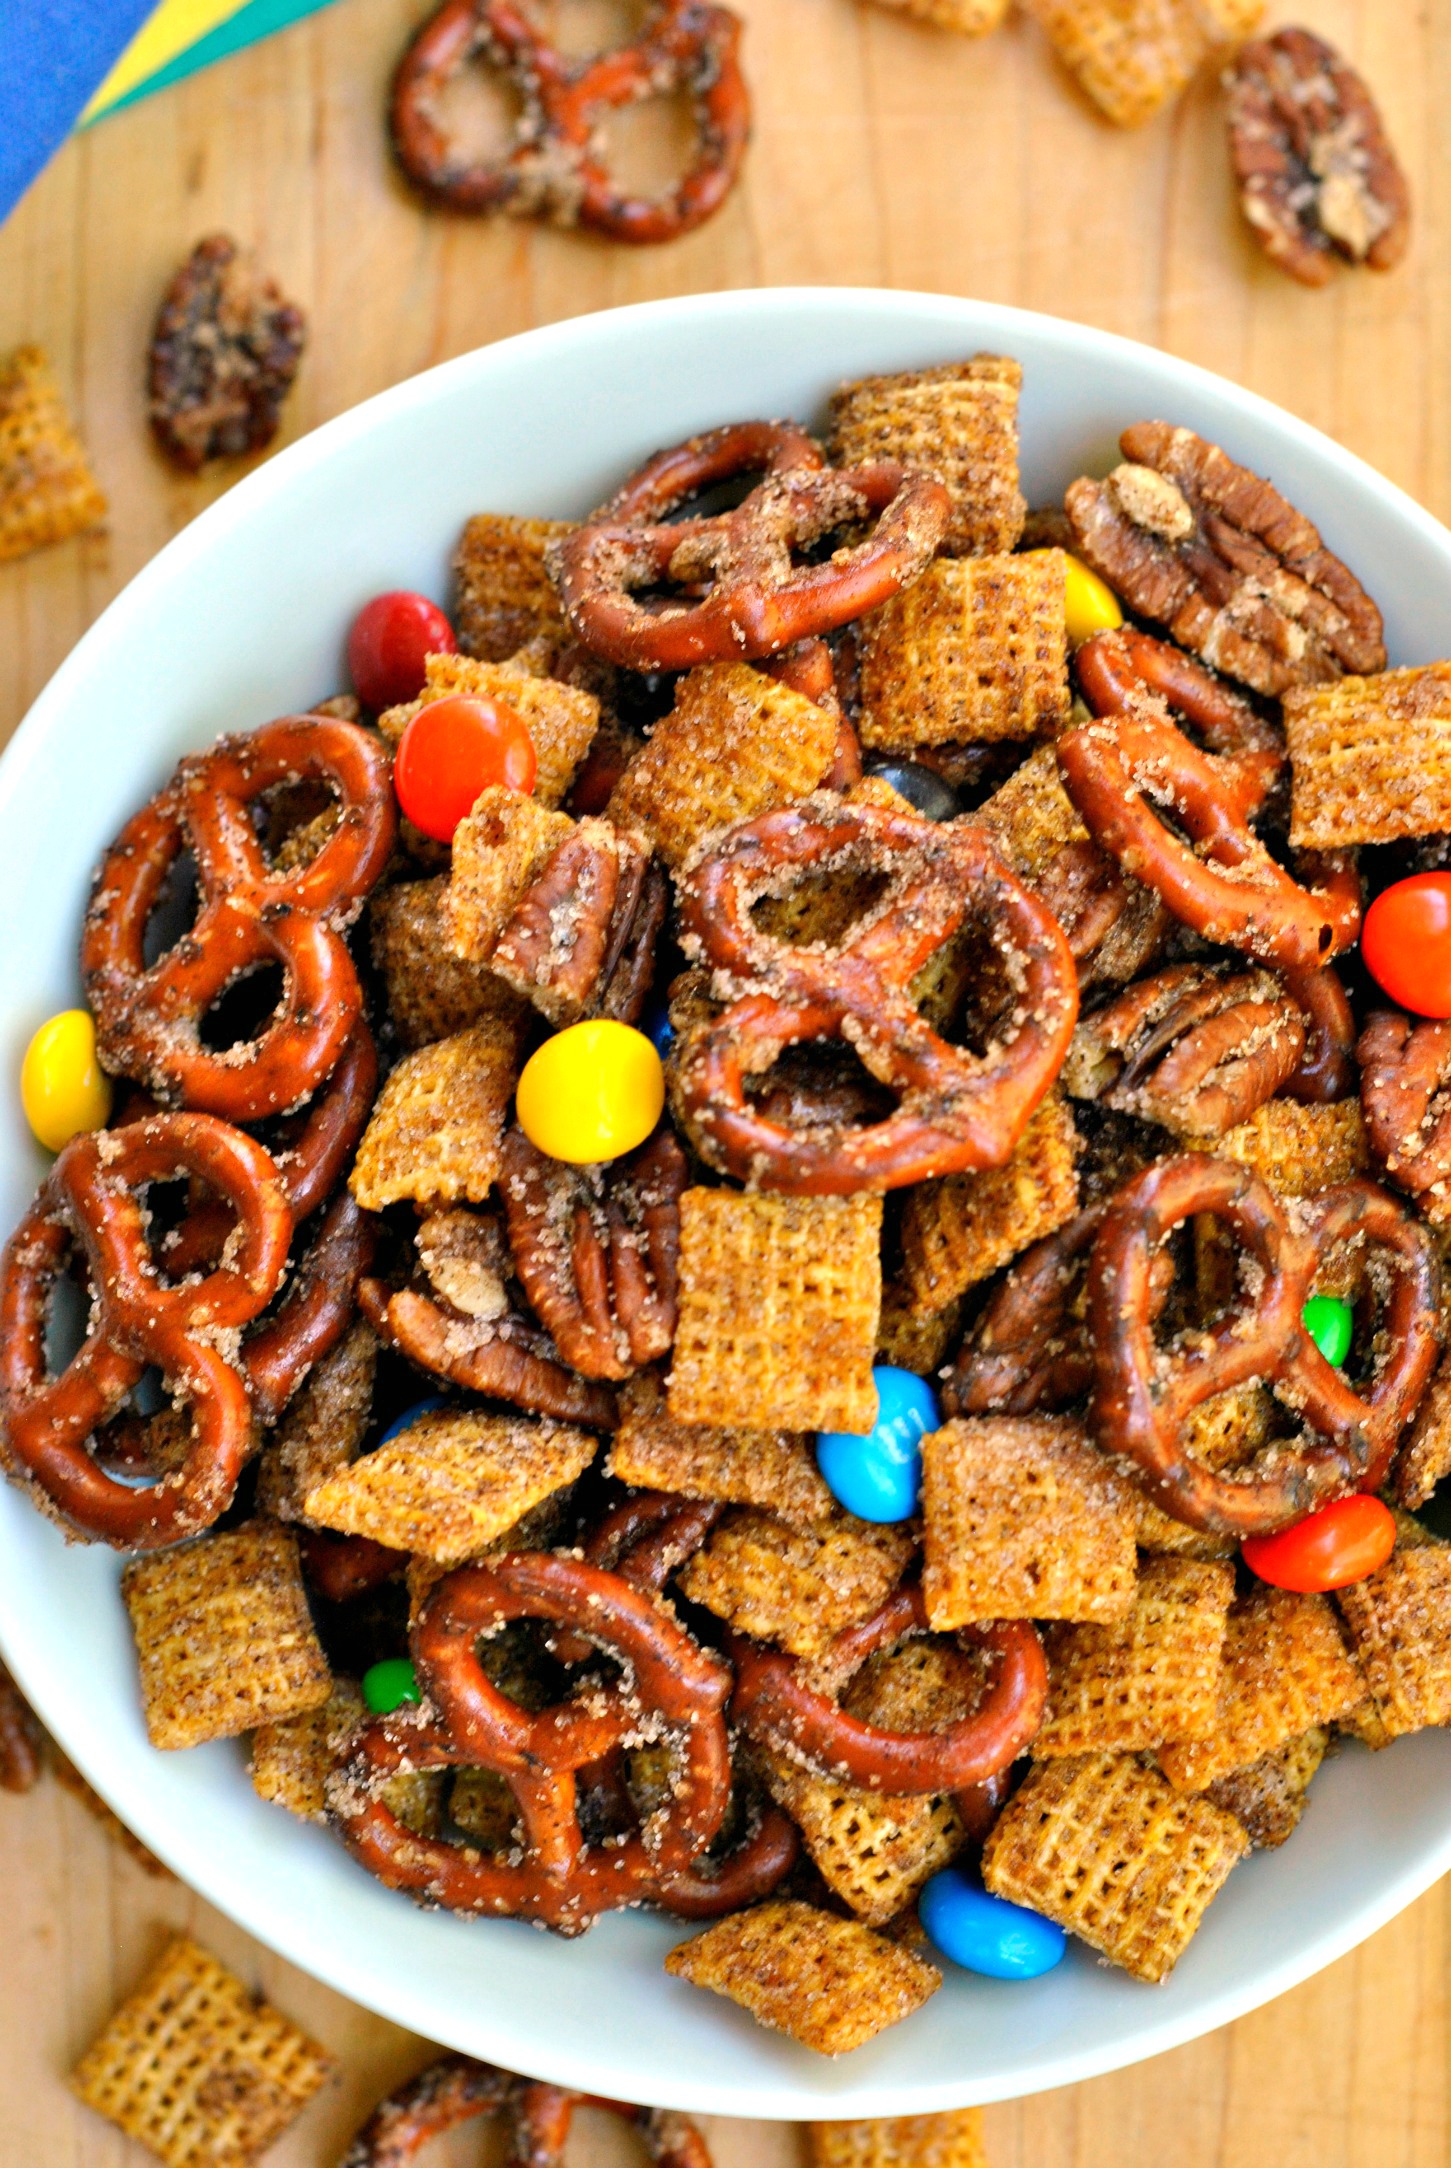 Cinnamon Sugar Snack Mix Recipe is perfect for satisfying your snack time cravings! Pretzels, pecans, candy, and cereal coated in cinnamon sugar make this mix so indulgent!